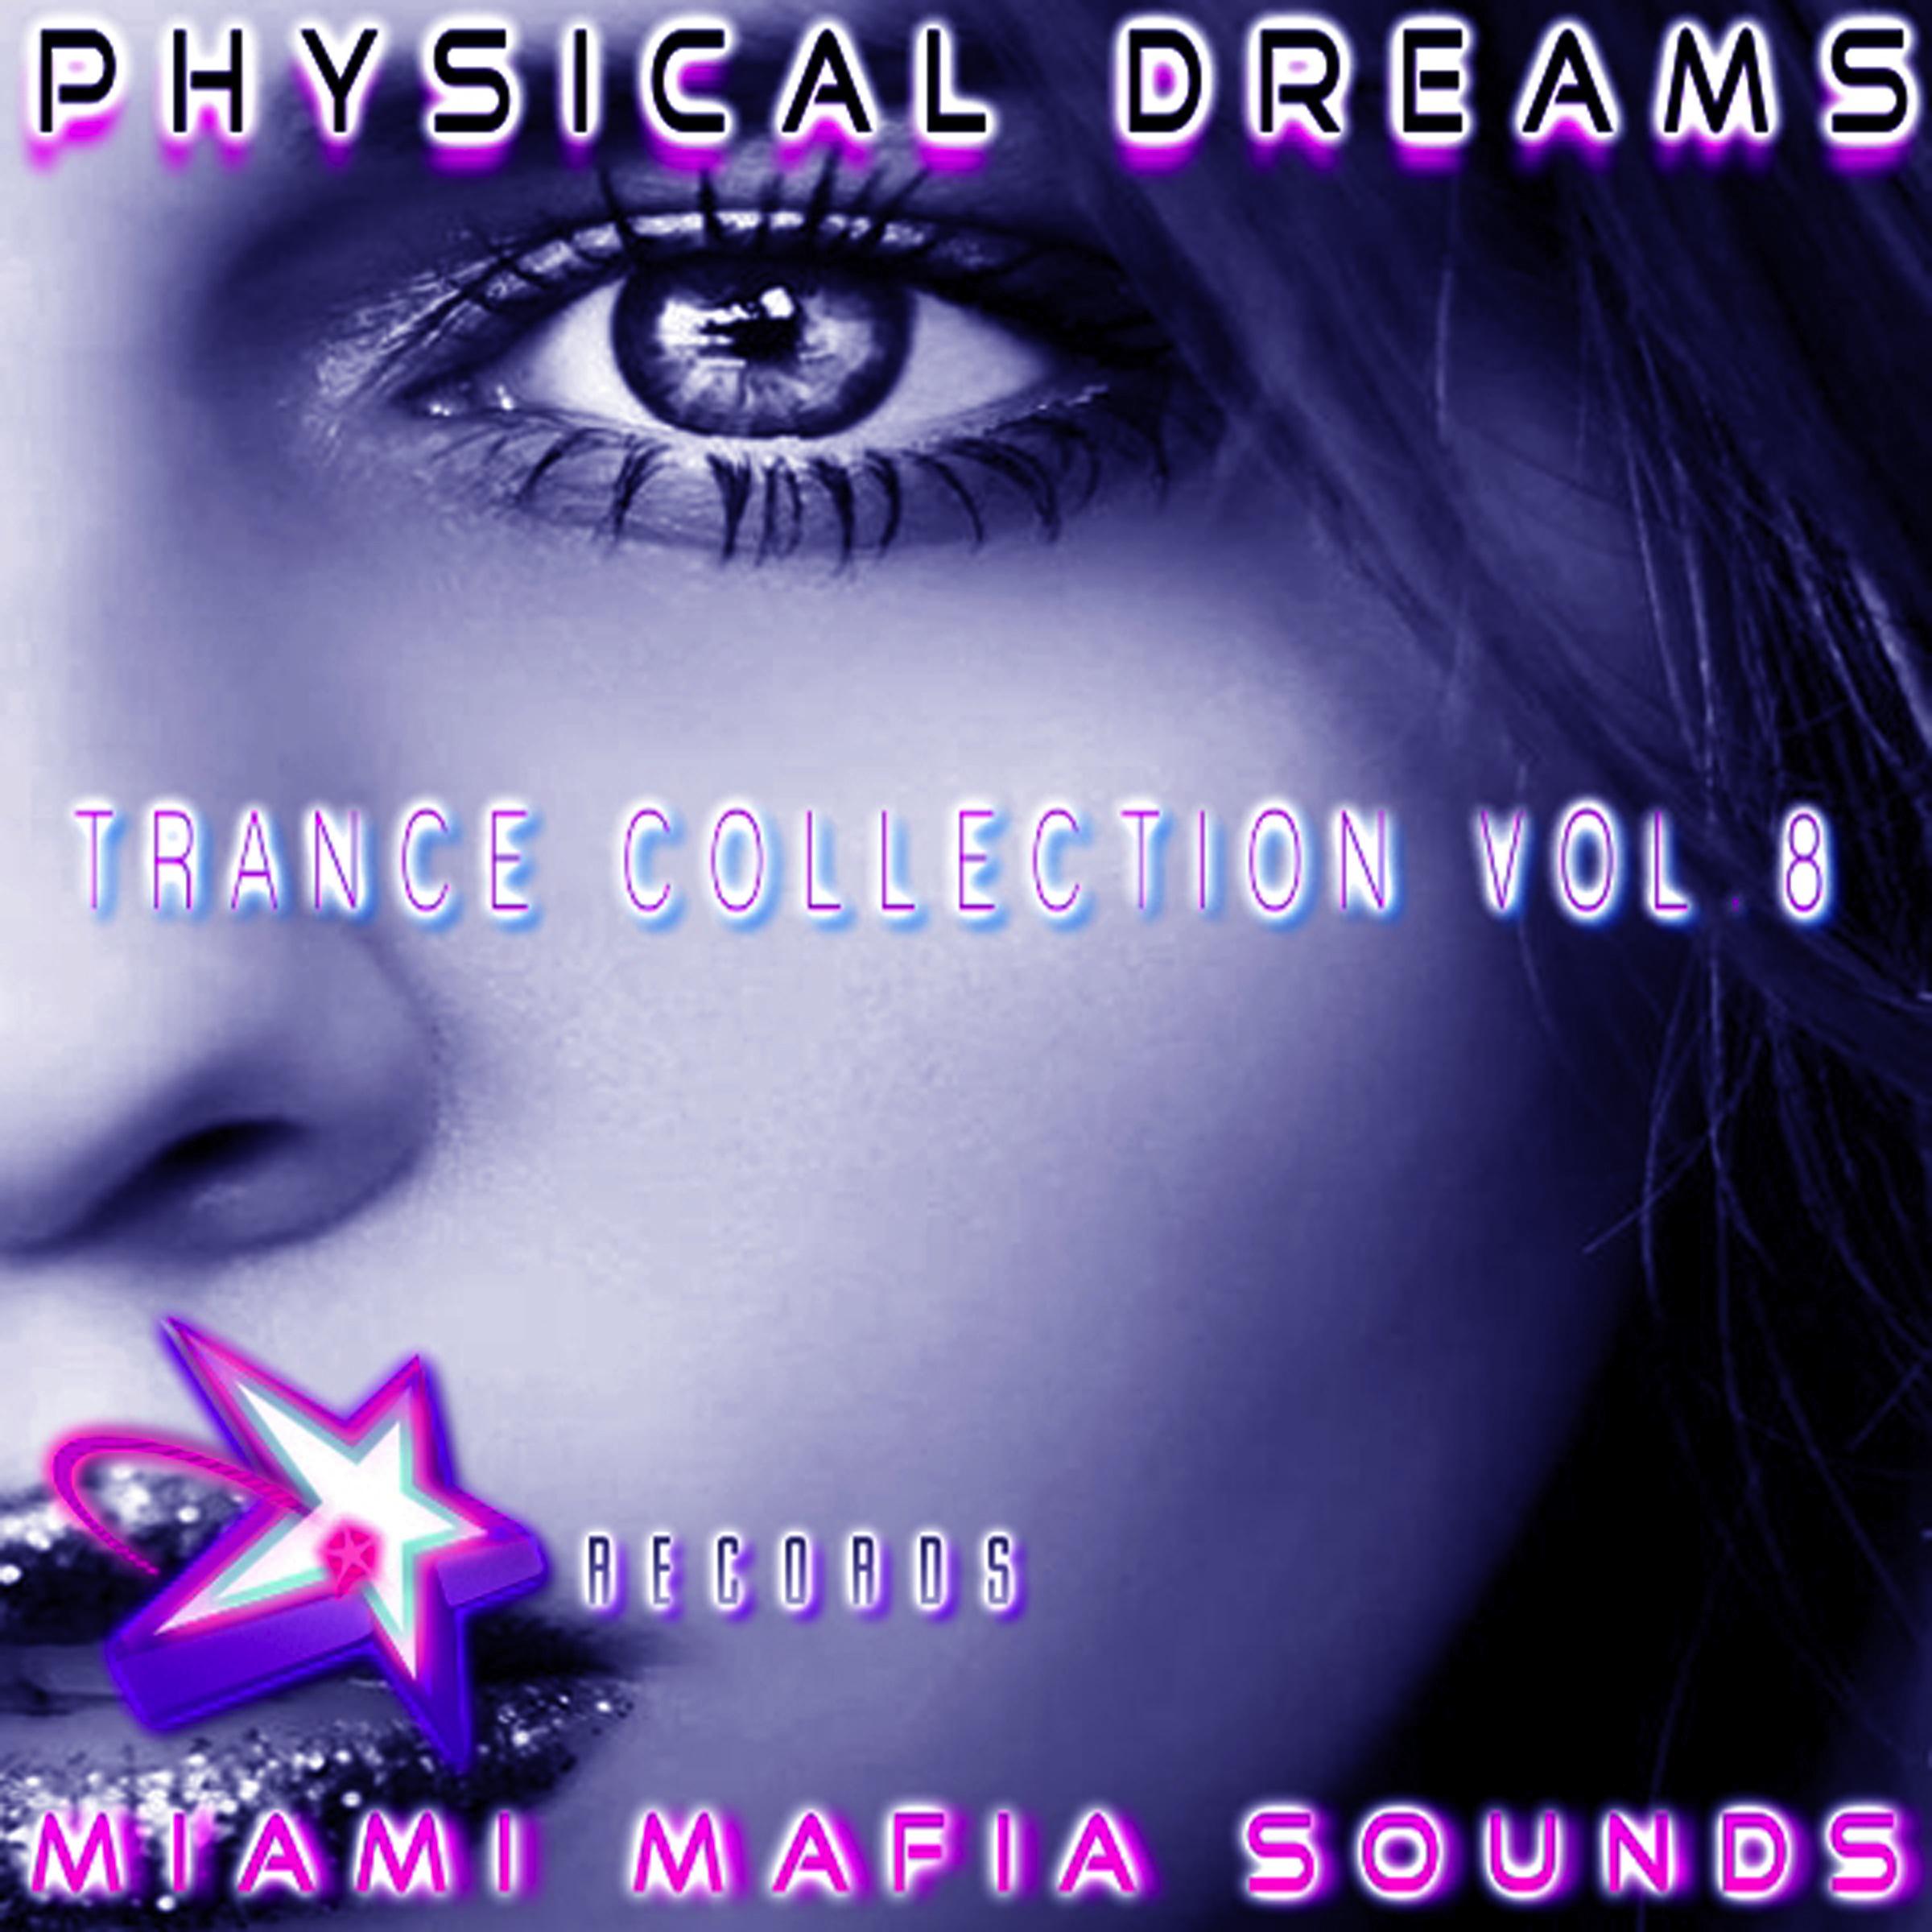 Physical Dreams Trance Collection, Vol. 8